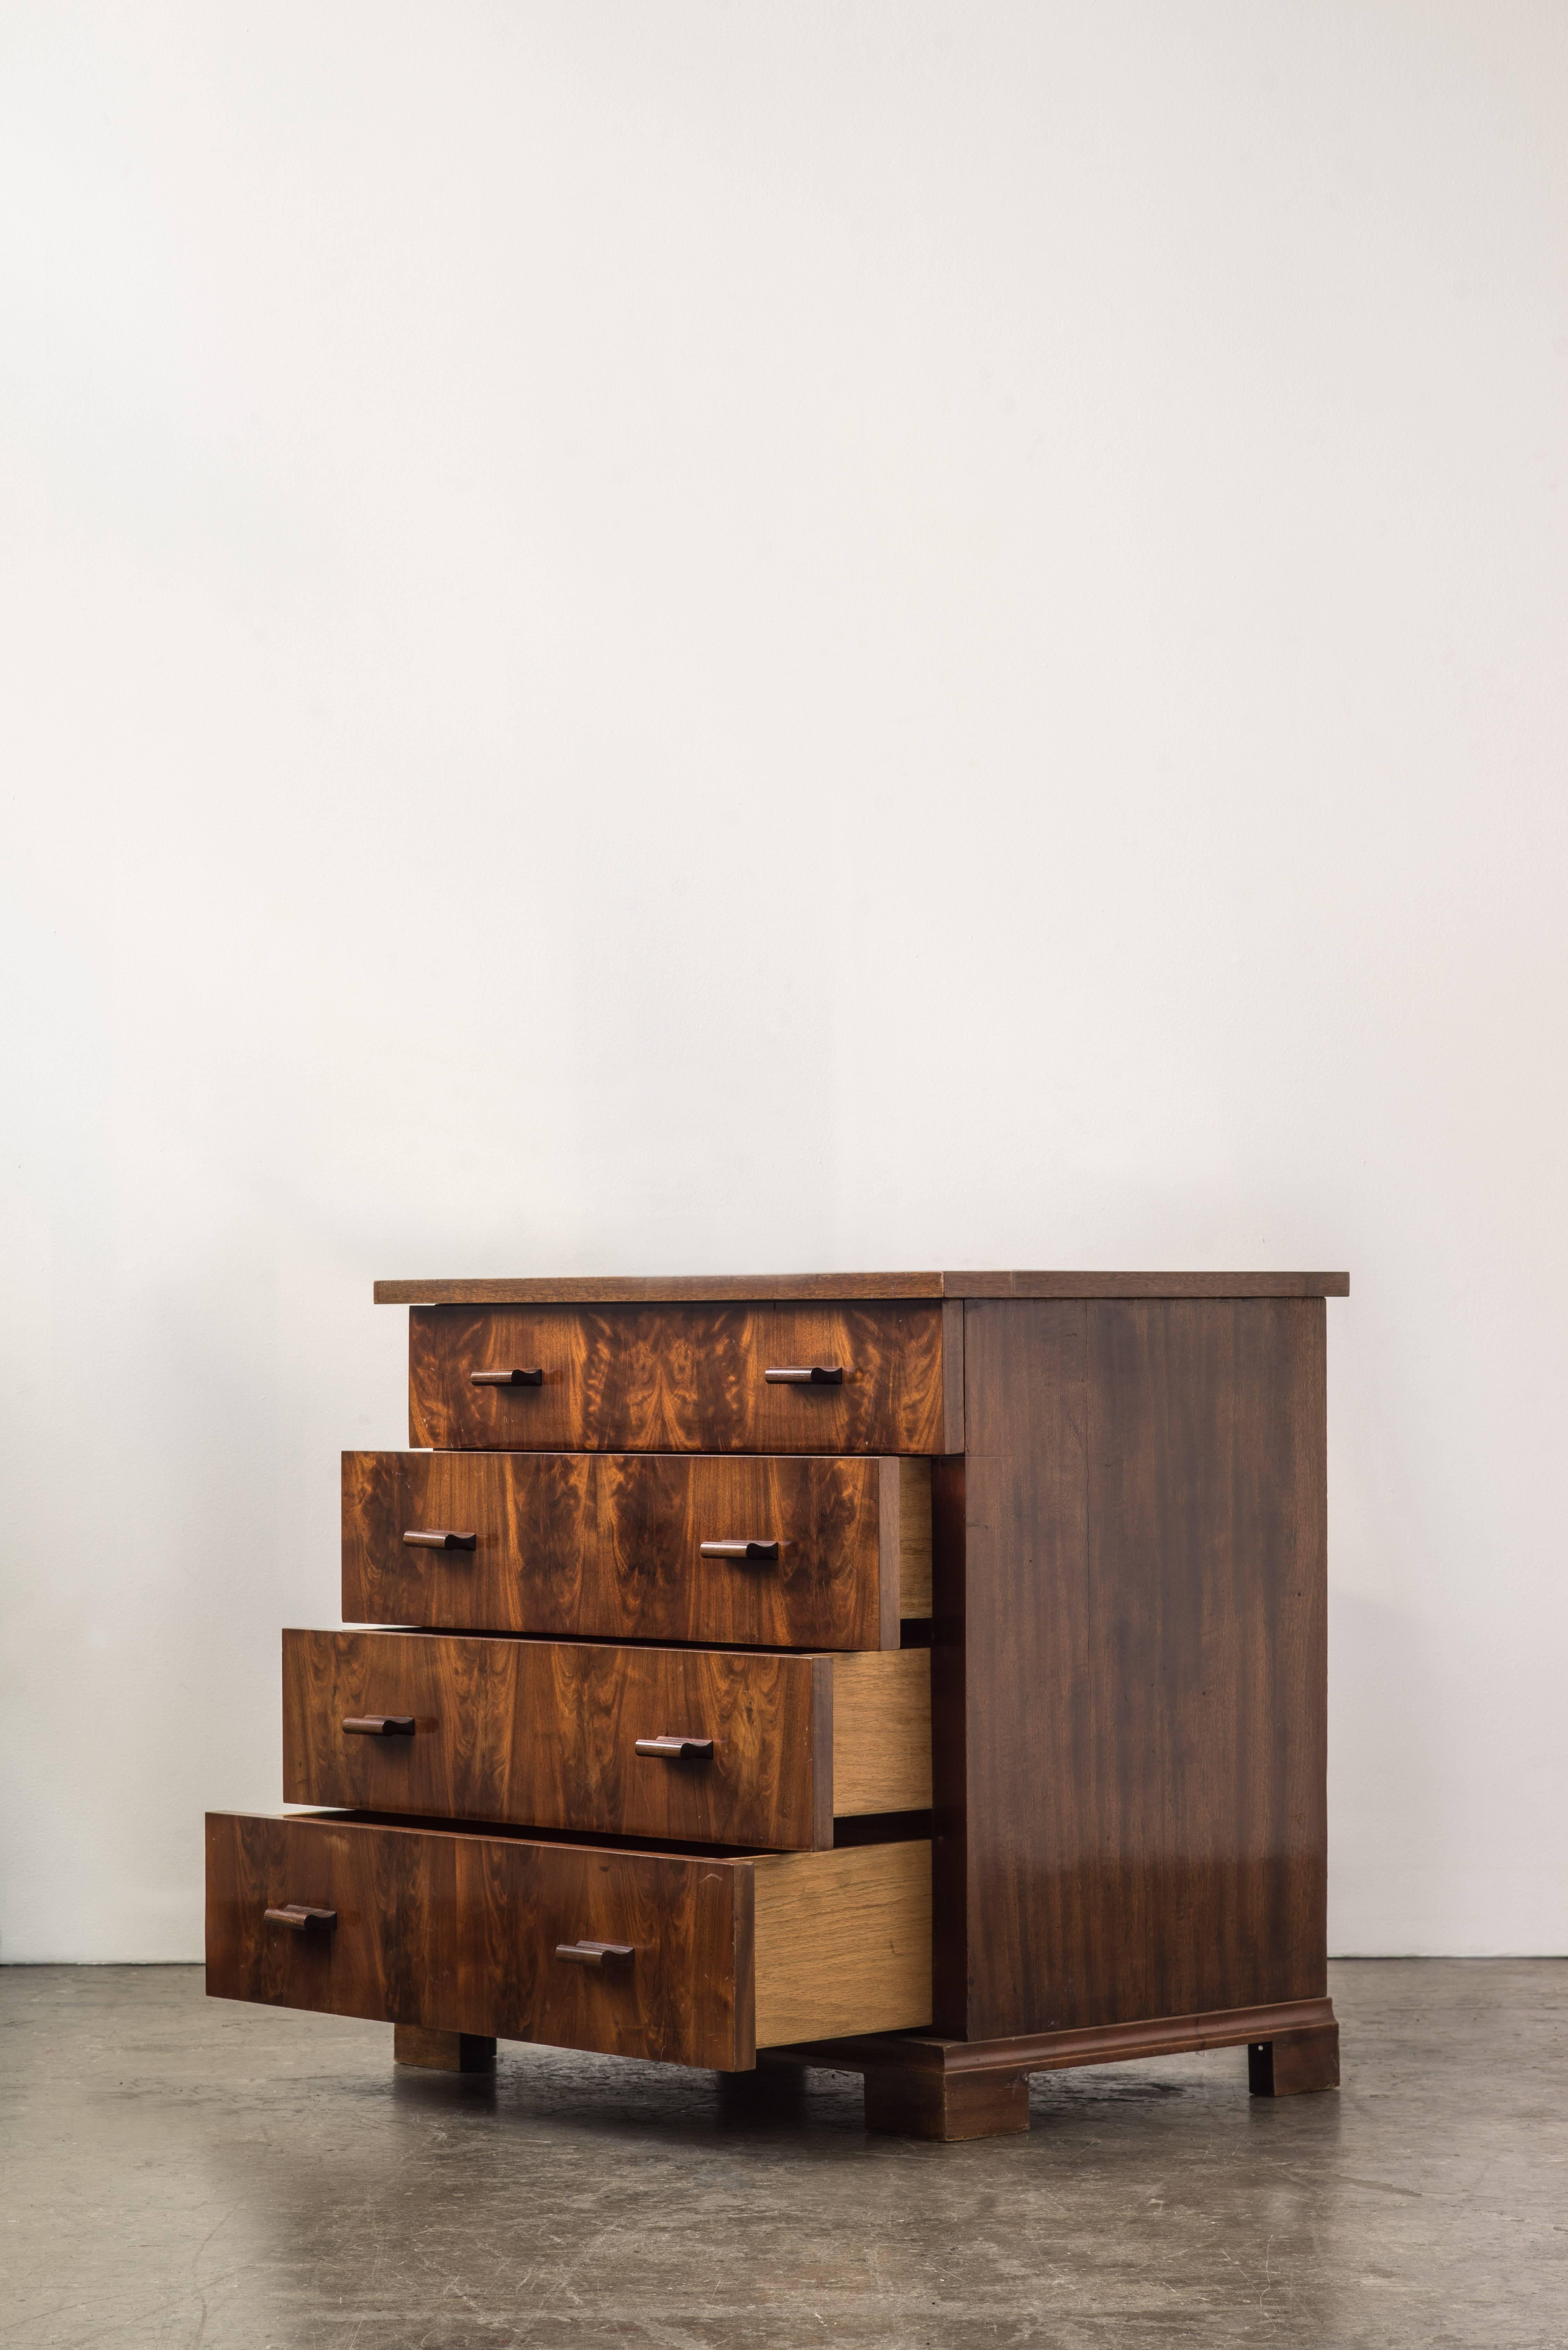 Chest in Fritz Schlegel style veneered walnut with rosewood handles. Drawers gradually get larger as you go down along the chest.

Measures: H 73 cm, D 50.5 cm, W 78 cm. Signs of wear.
